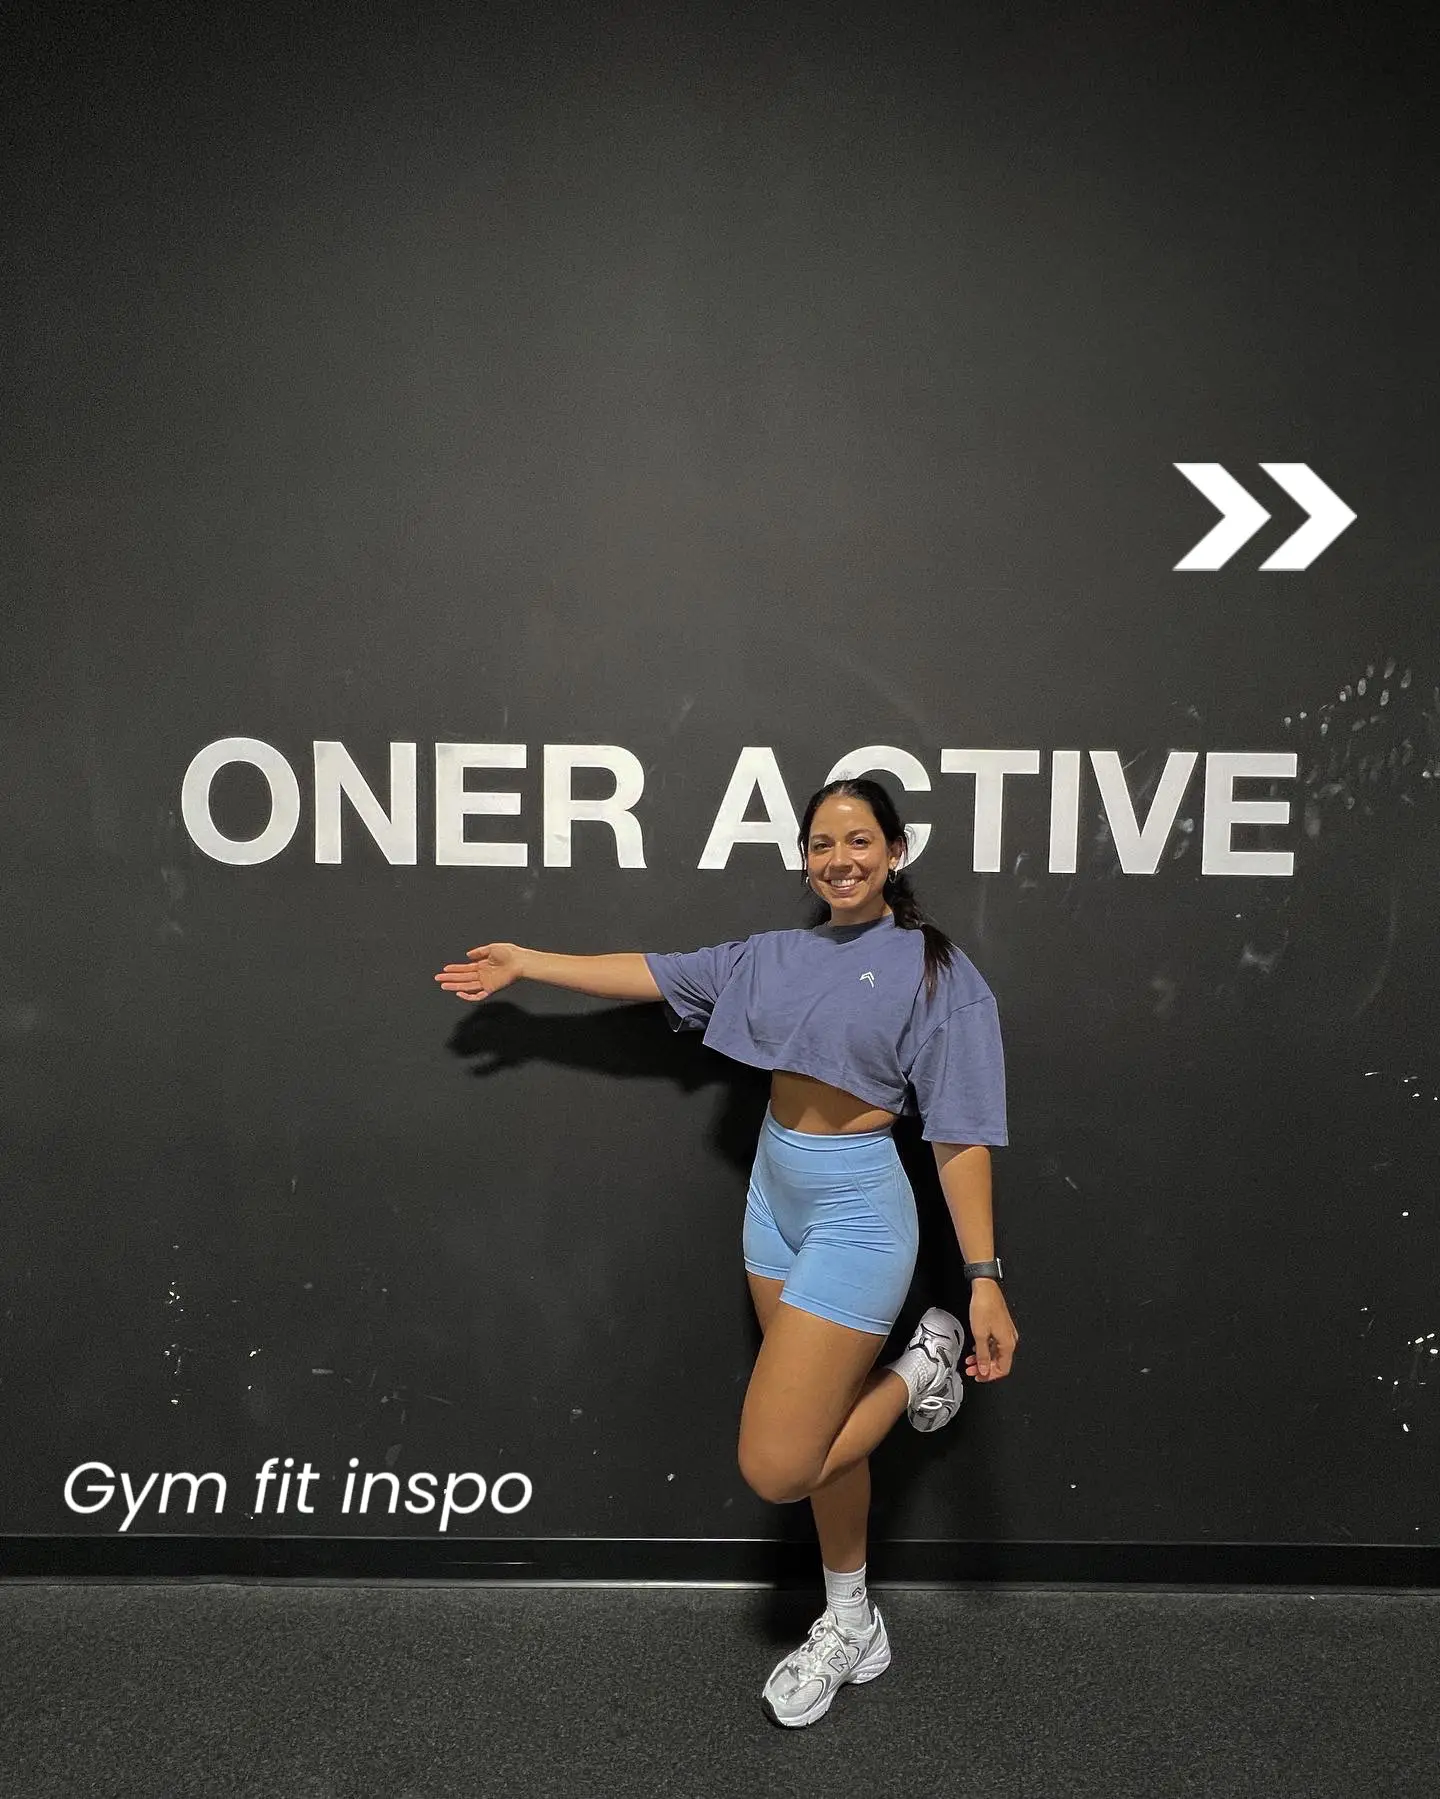 Let's Talk Activewear: Oner Active Shorts Review 👇🏼, Video published by  Lydia Fleur